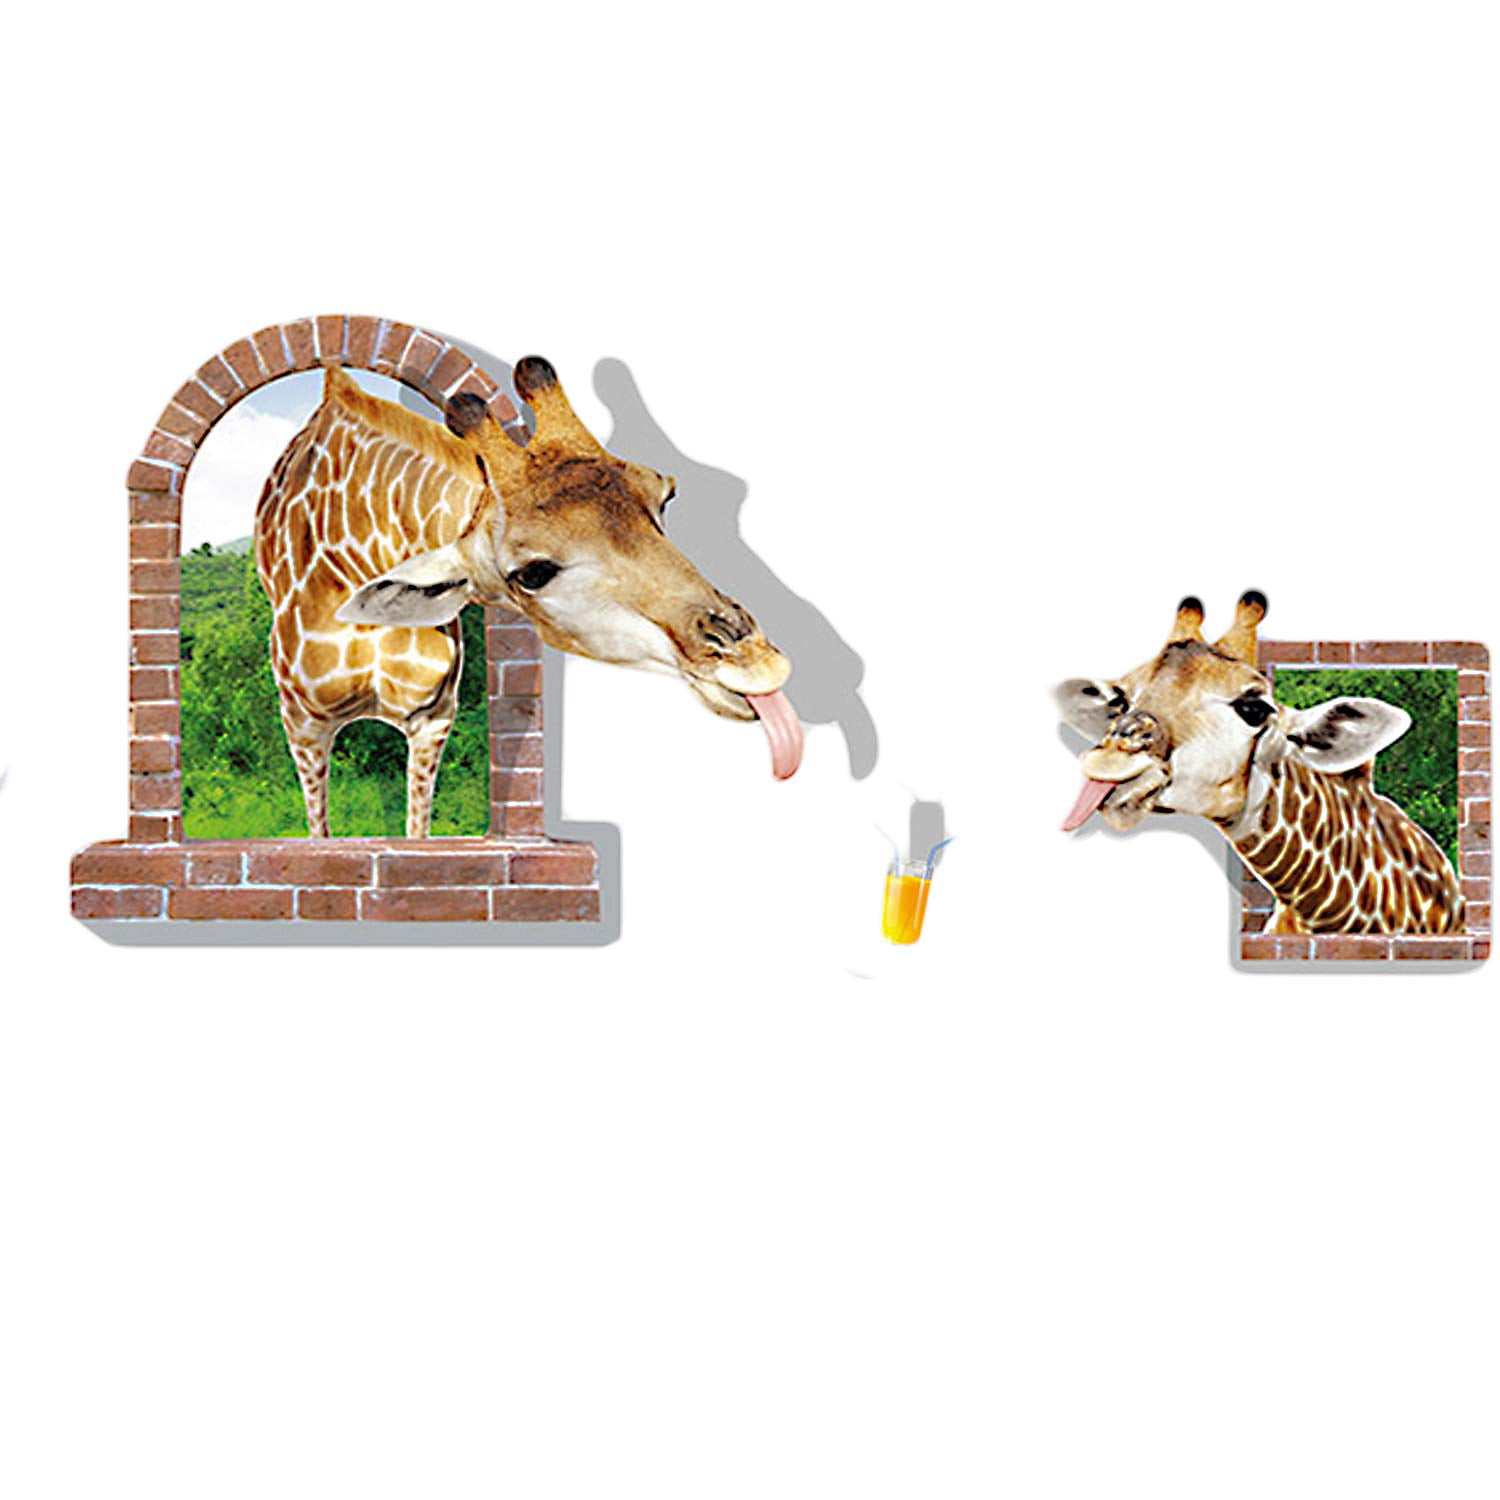 3D Giraffe Wall Stickers,Removable Funny Giraffe Animal Home Decoration, 3D  Vivid Mural Decals 